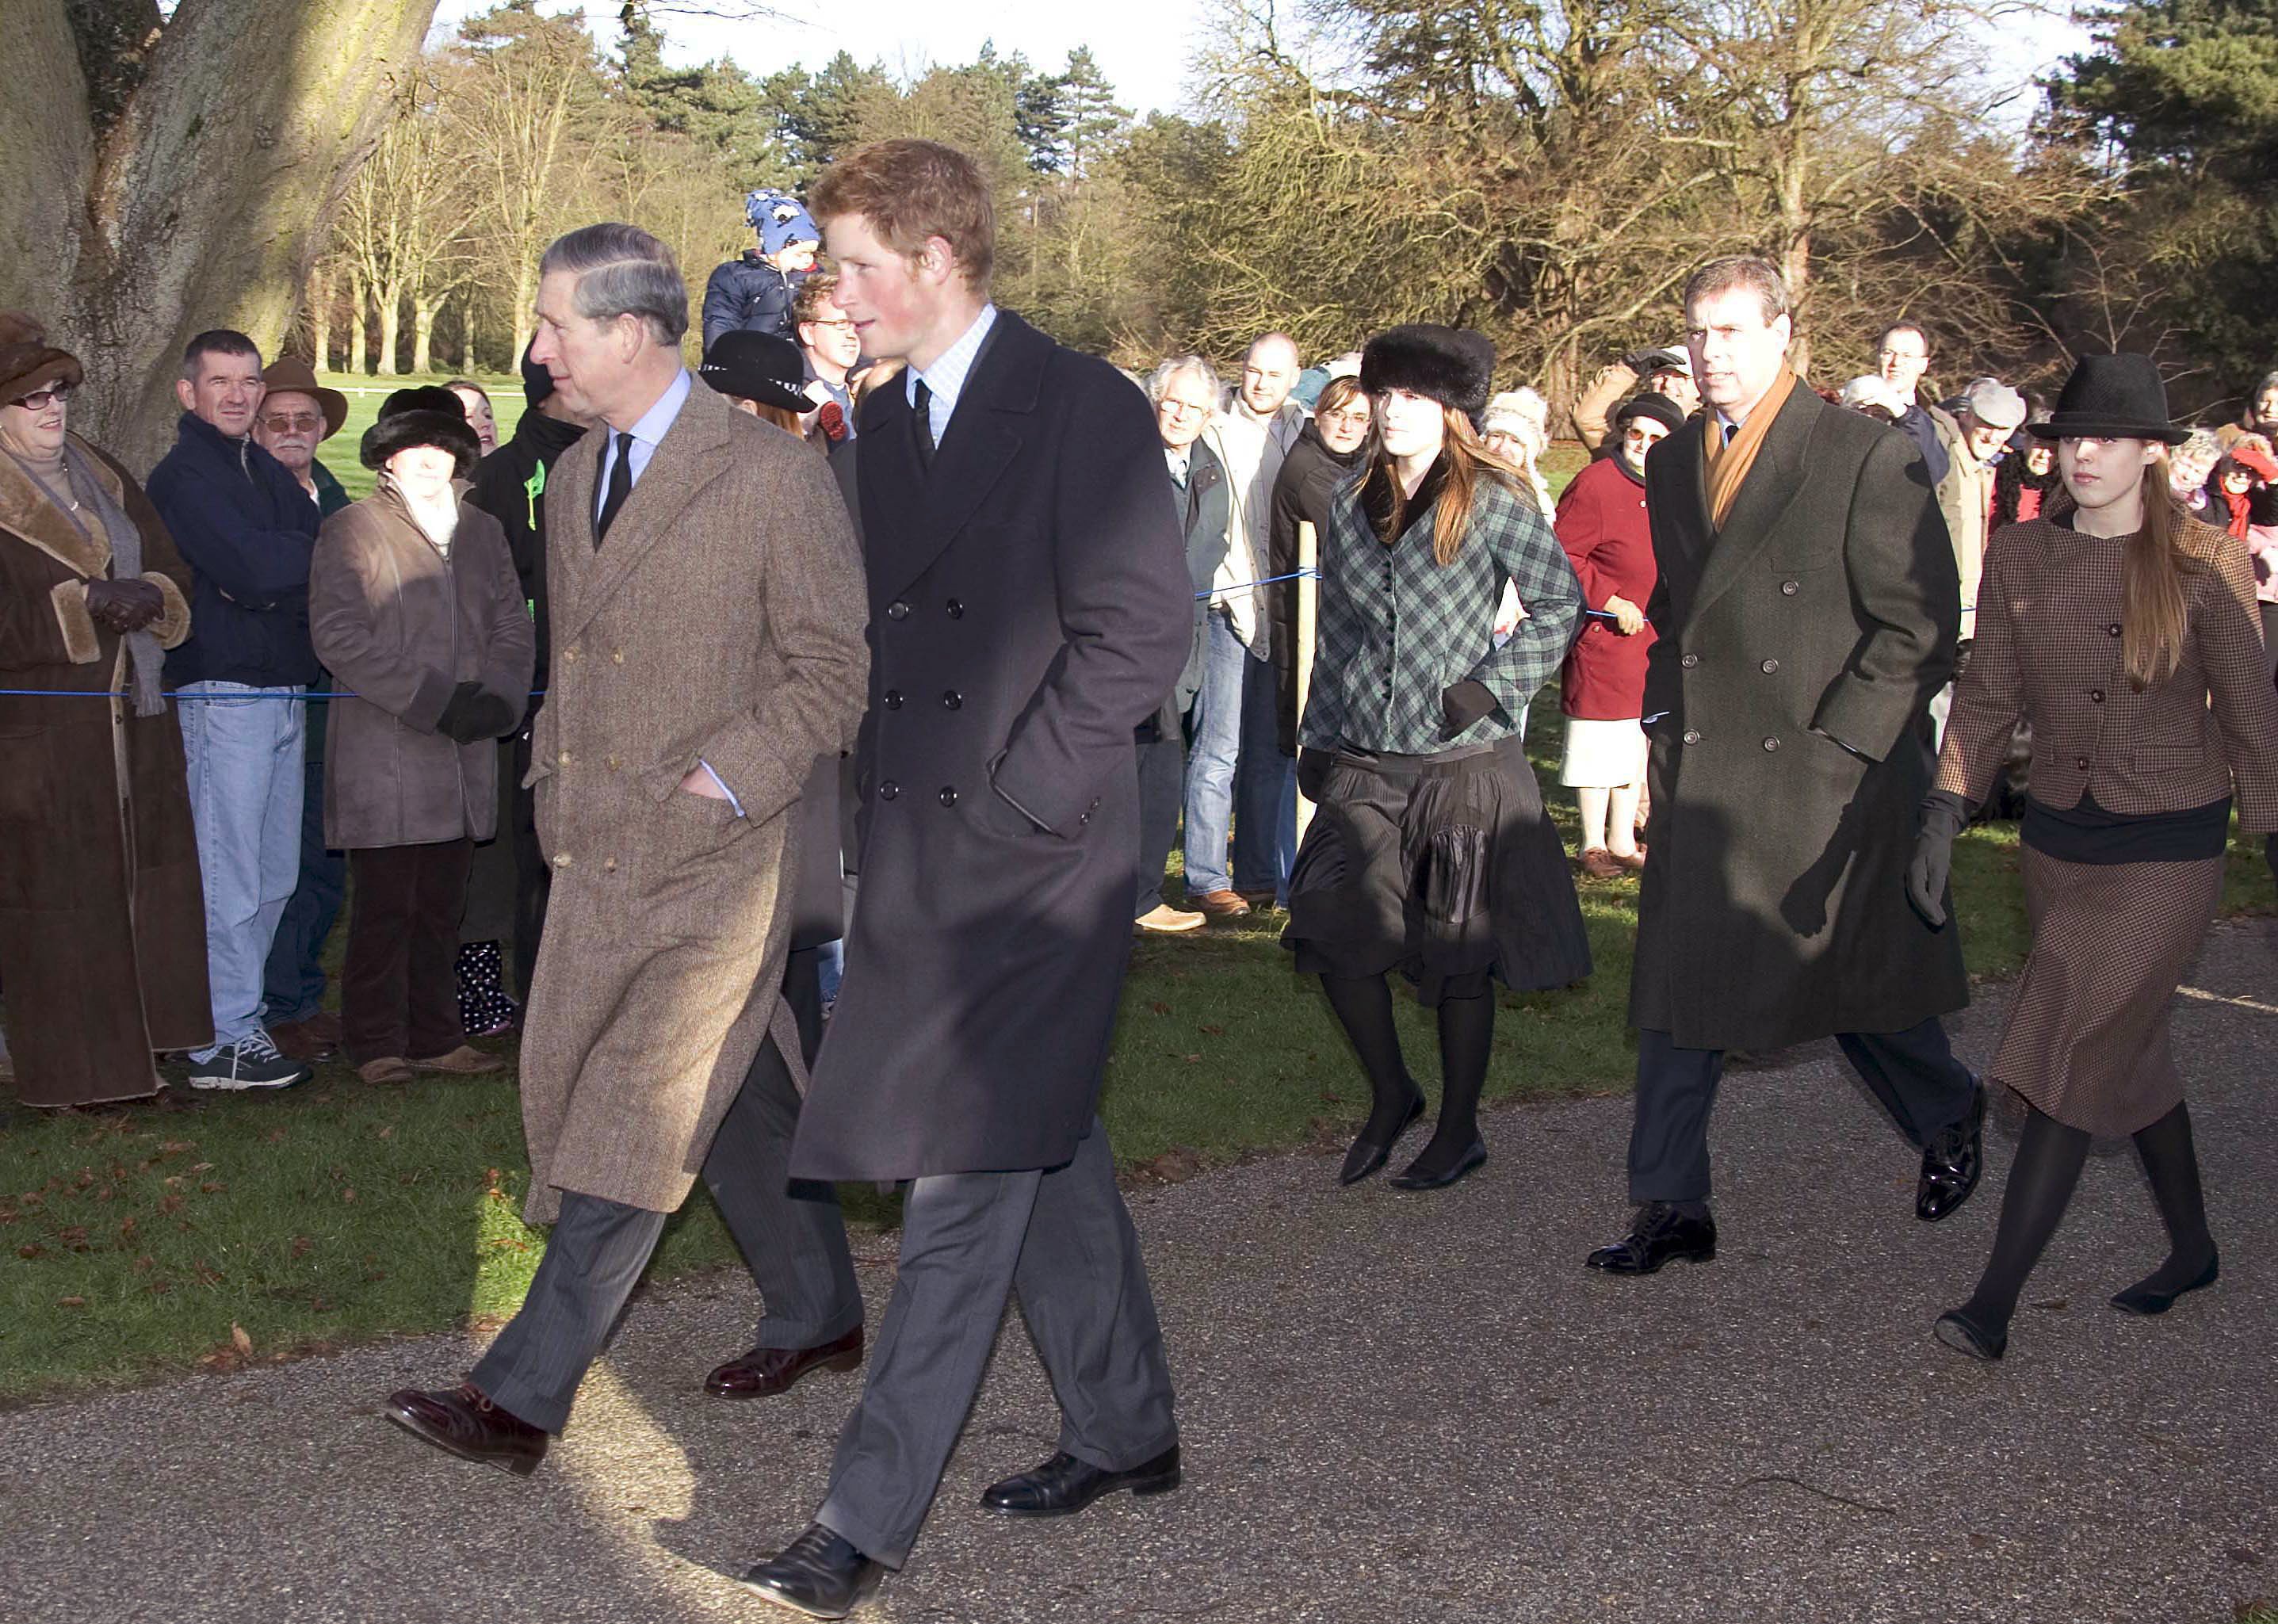 Prince Charles, Prince Harry, Prince Andrew and his daughters Princess Beatrice and Princess Eugenie pictured walking to church at Sandringham on Boxing Day. | Source: Getty Images